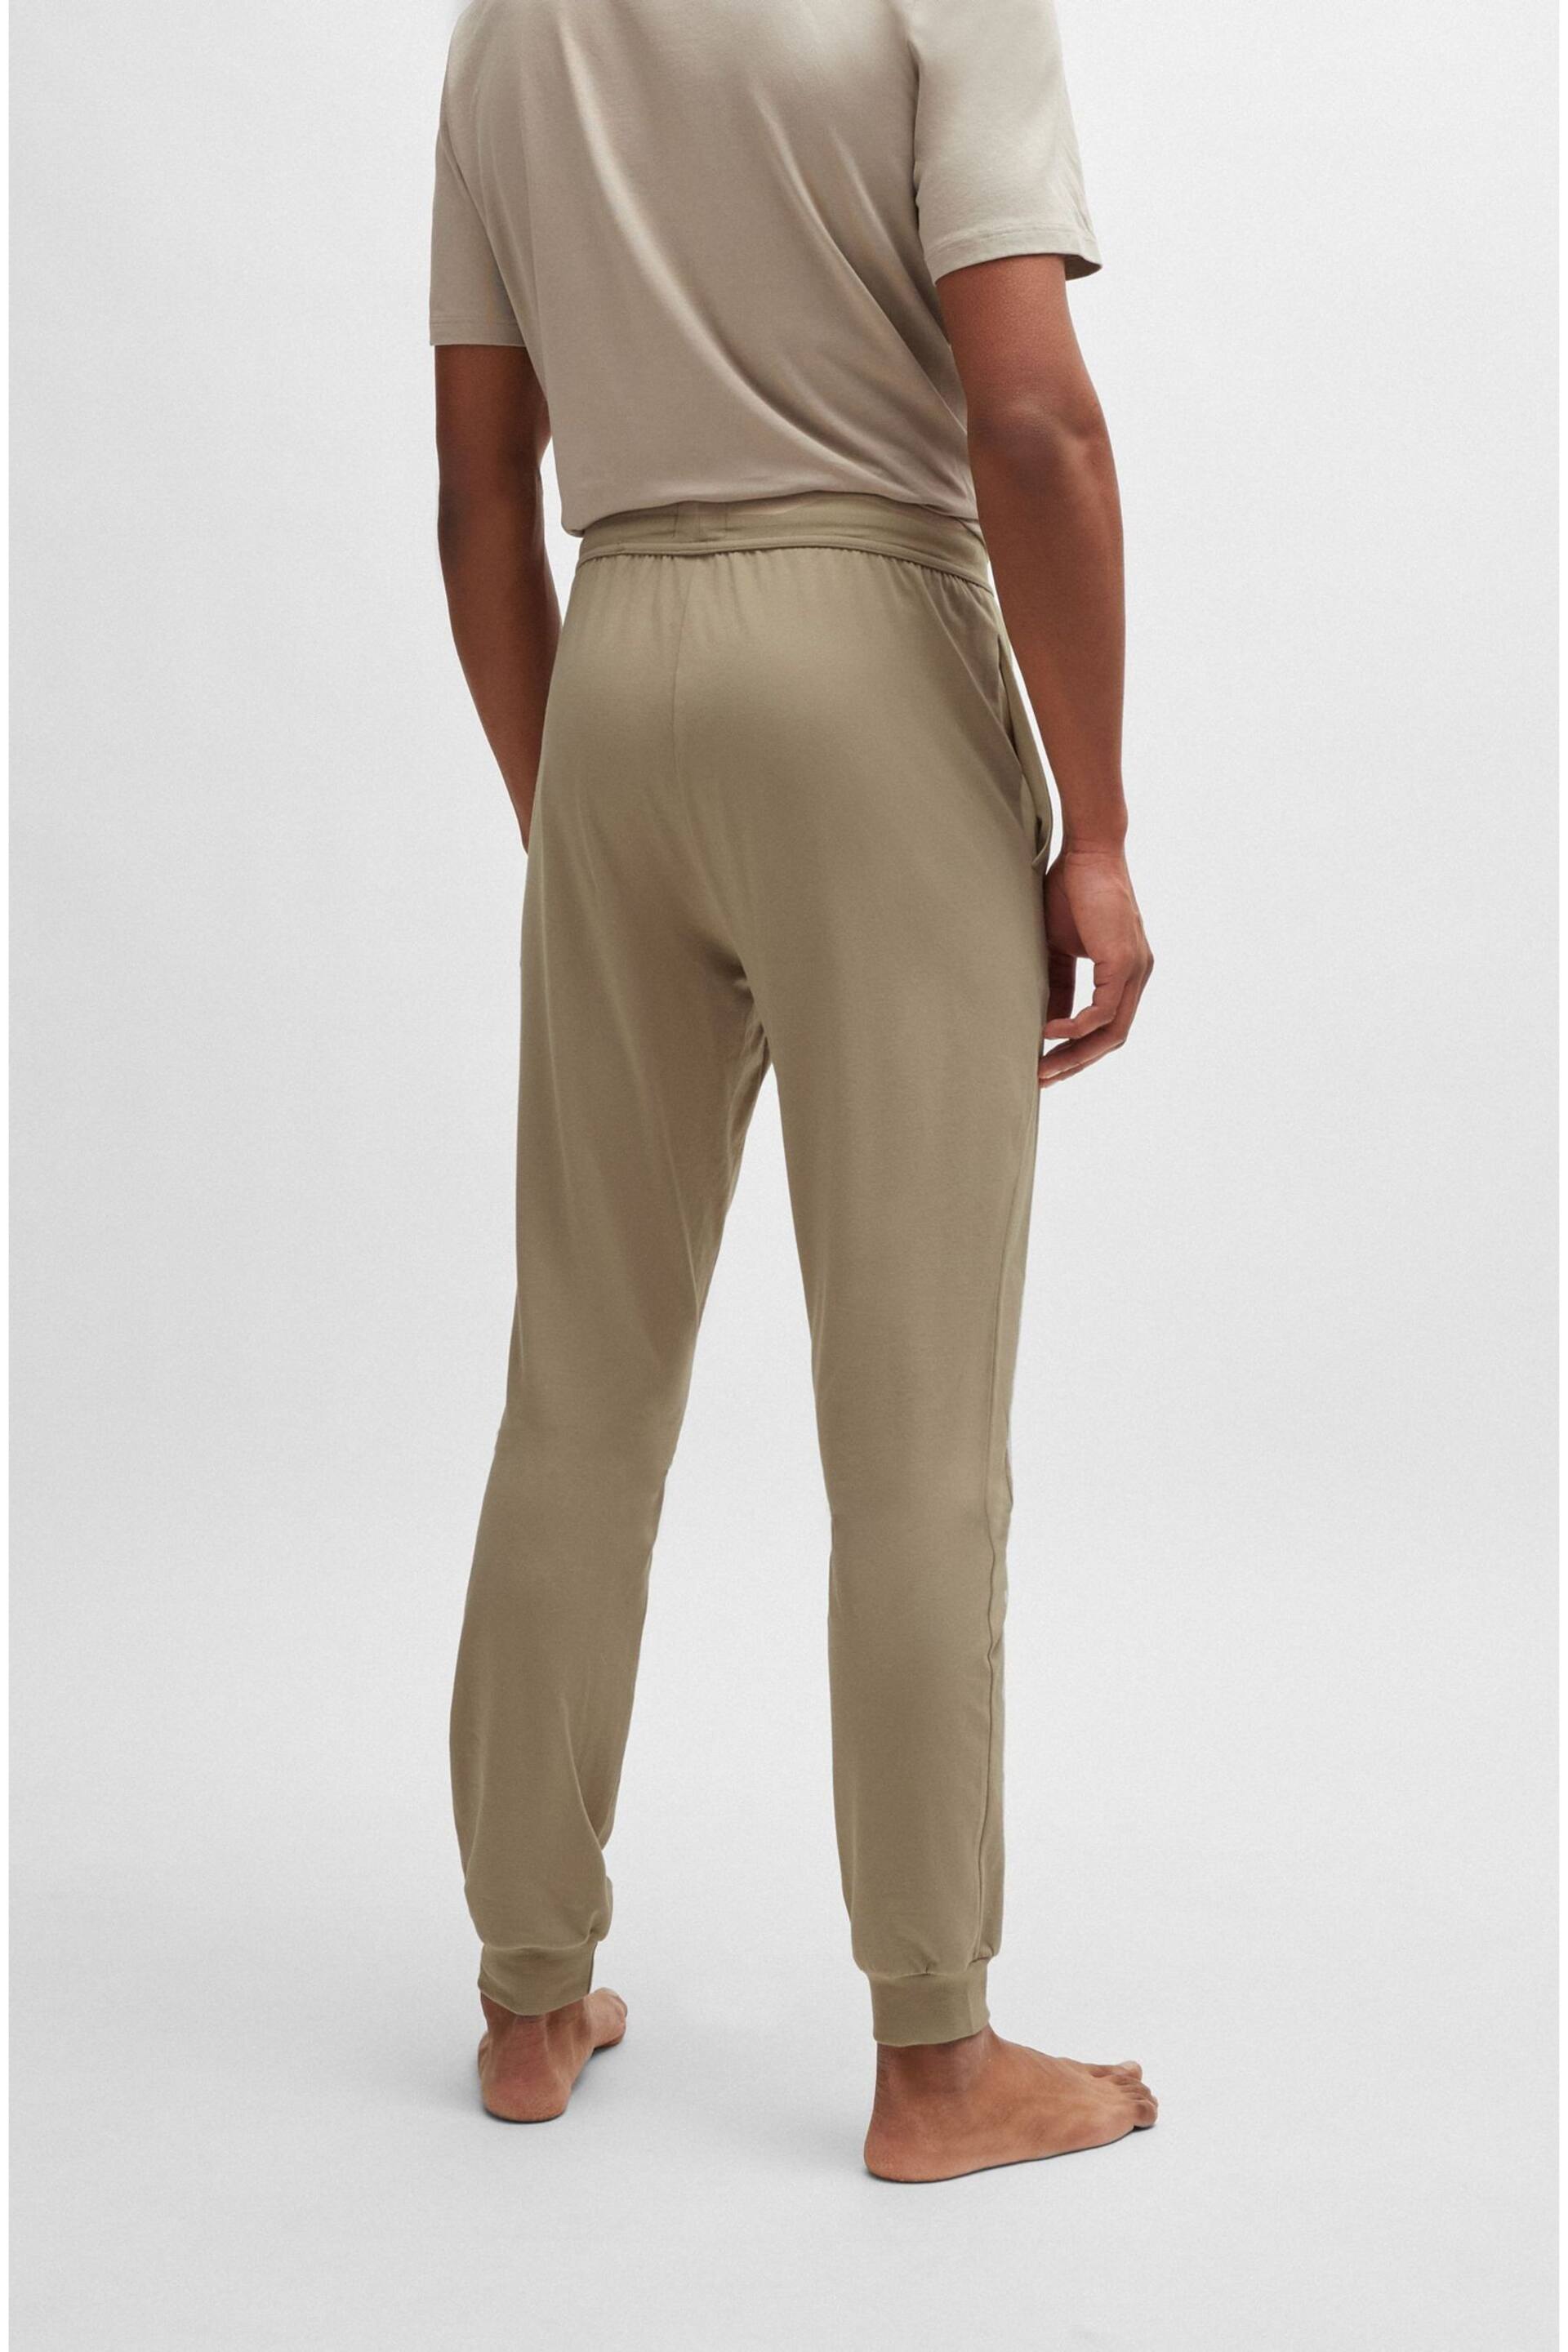 BOSS Beige Embroidered Logo Stretch Cotton Joggers - Image 3 of 5